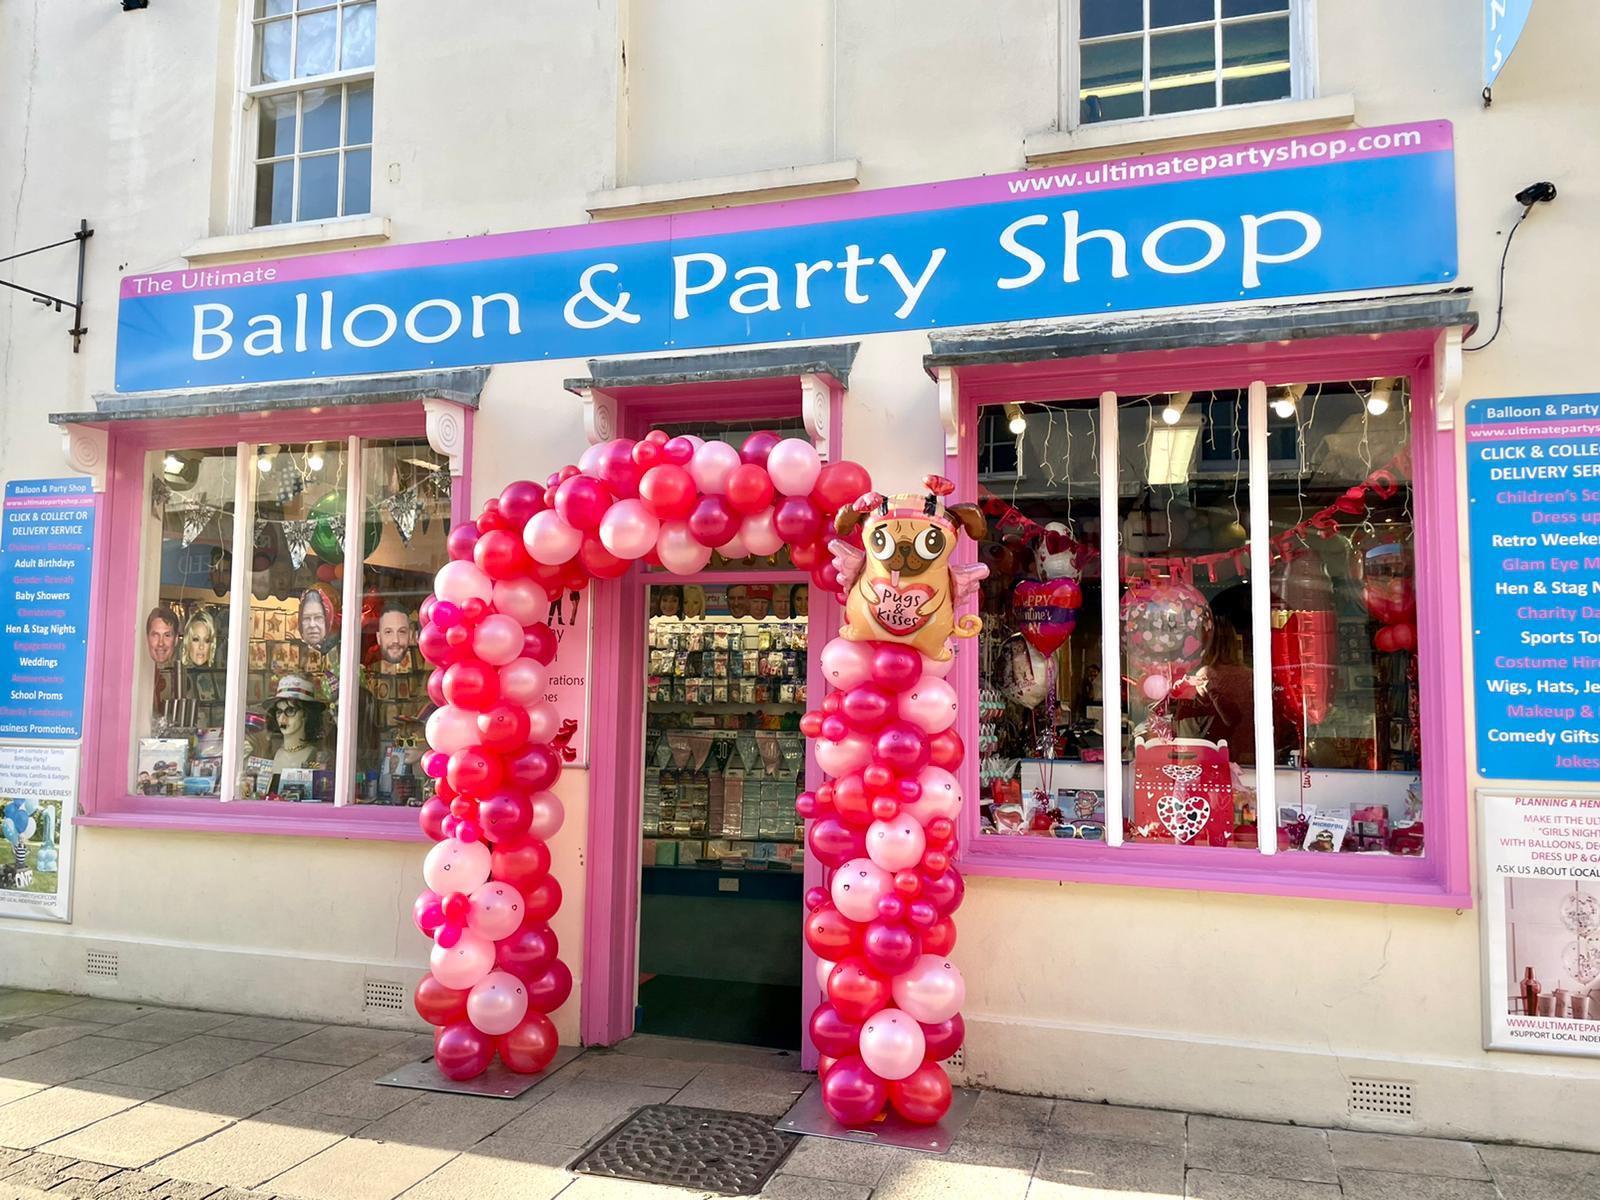 The Ultimate Balloon & Party Shop